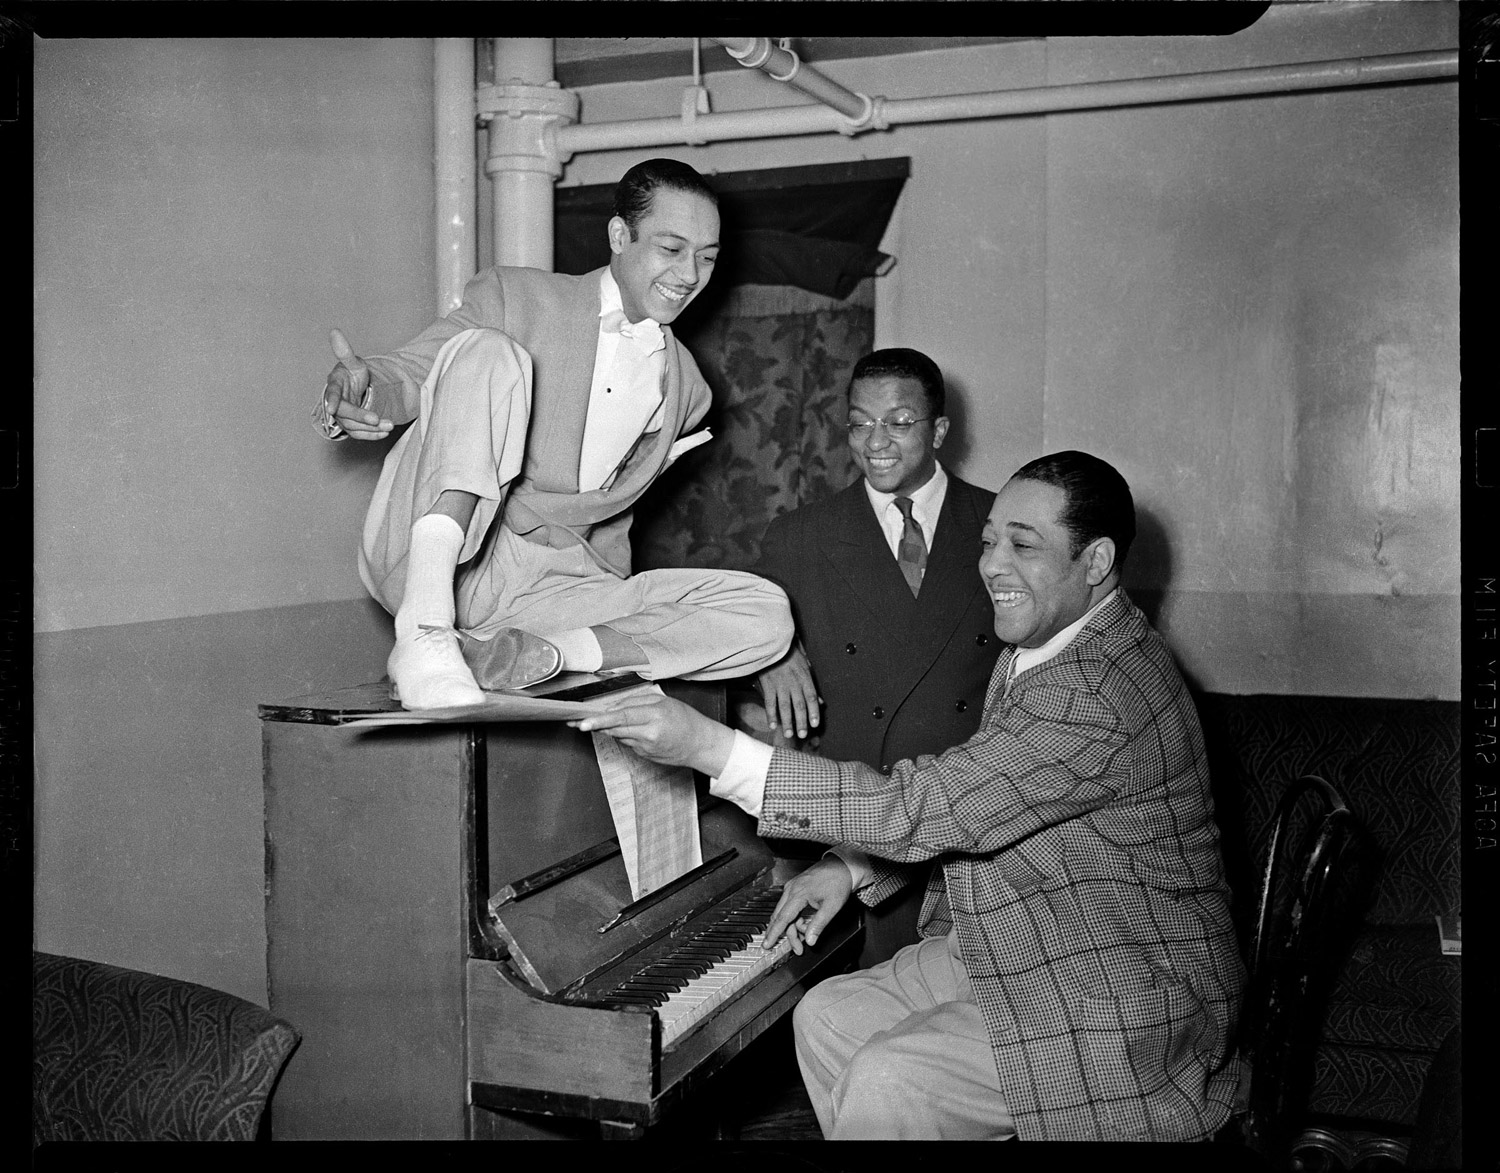 Duke Ellington at a piano with dancer Honey Coles and Billy Strayhorn looking on, in the Stanley Theatre, 1942-1943.